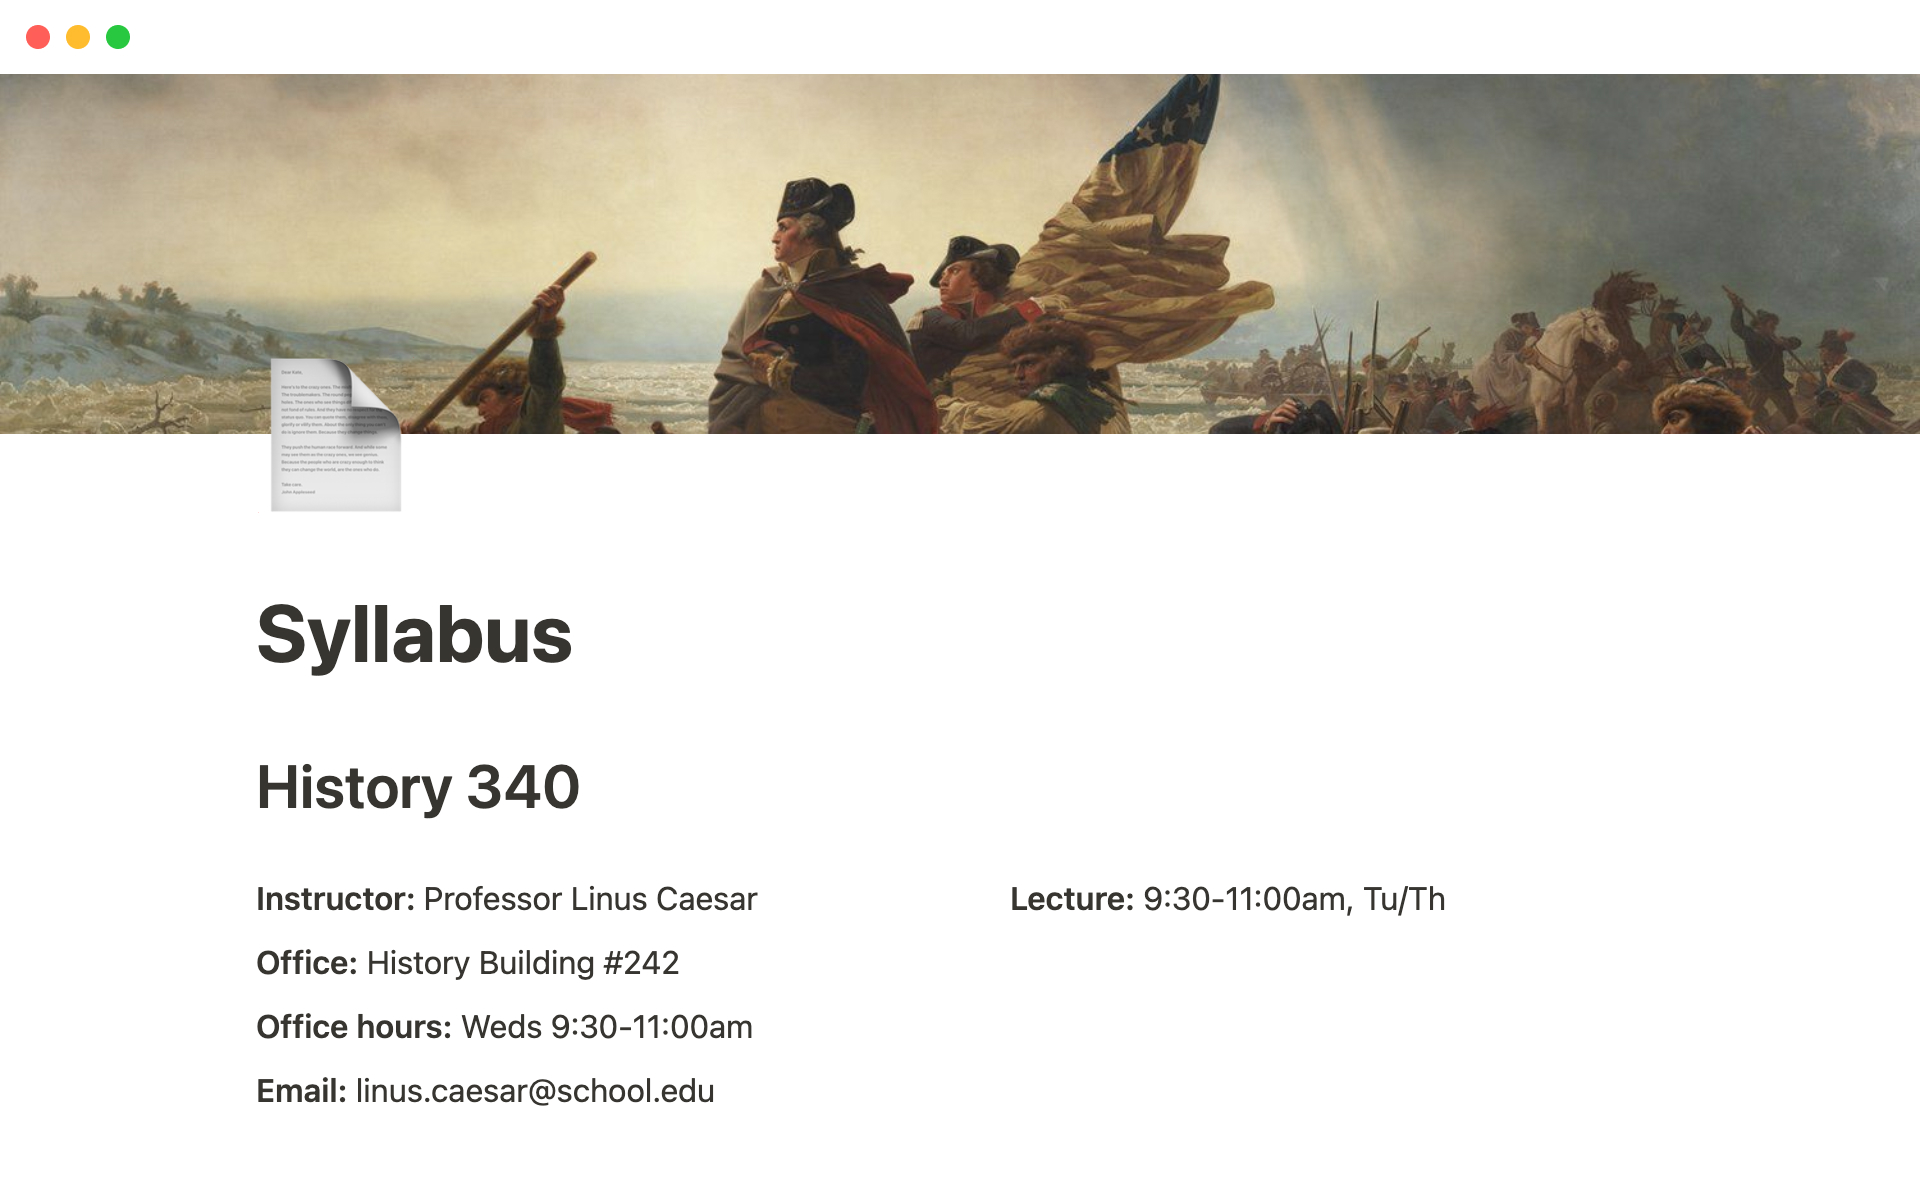 The desktop image for the Syllabus template